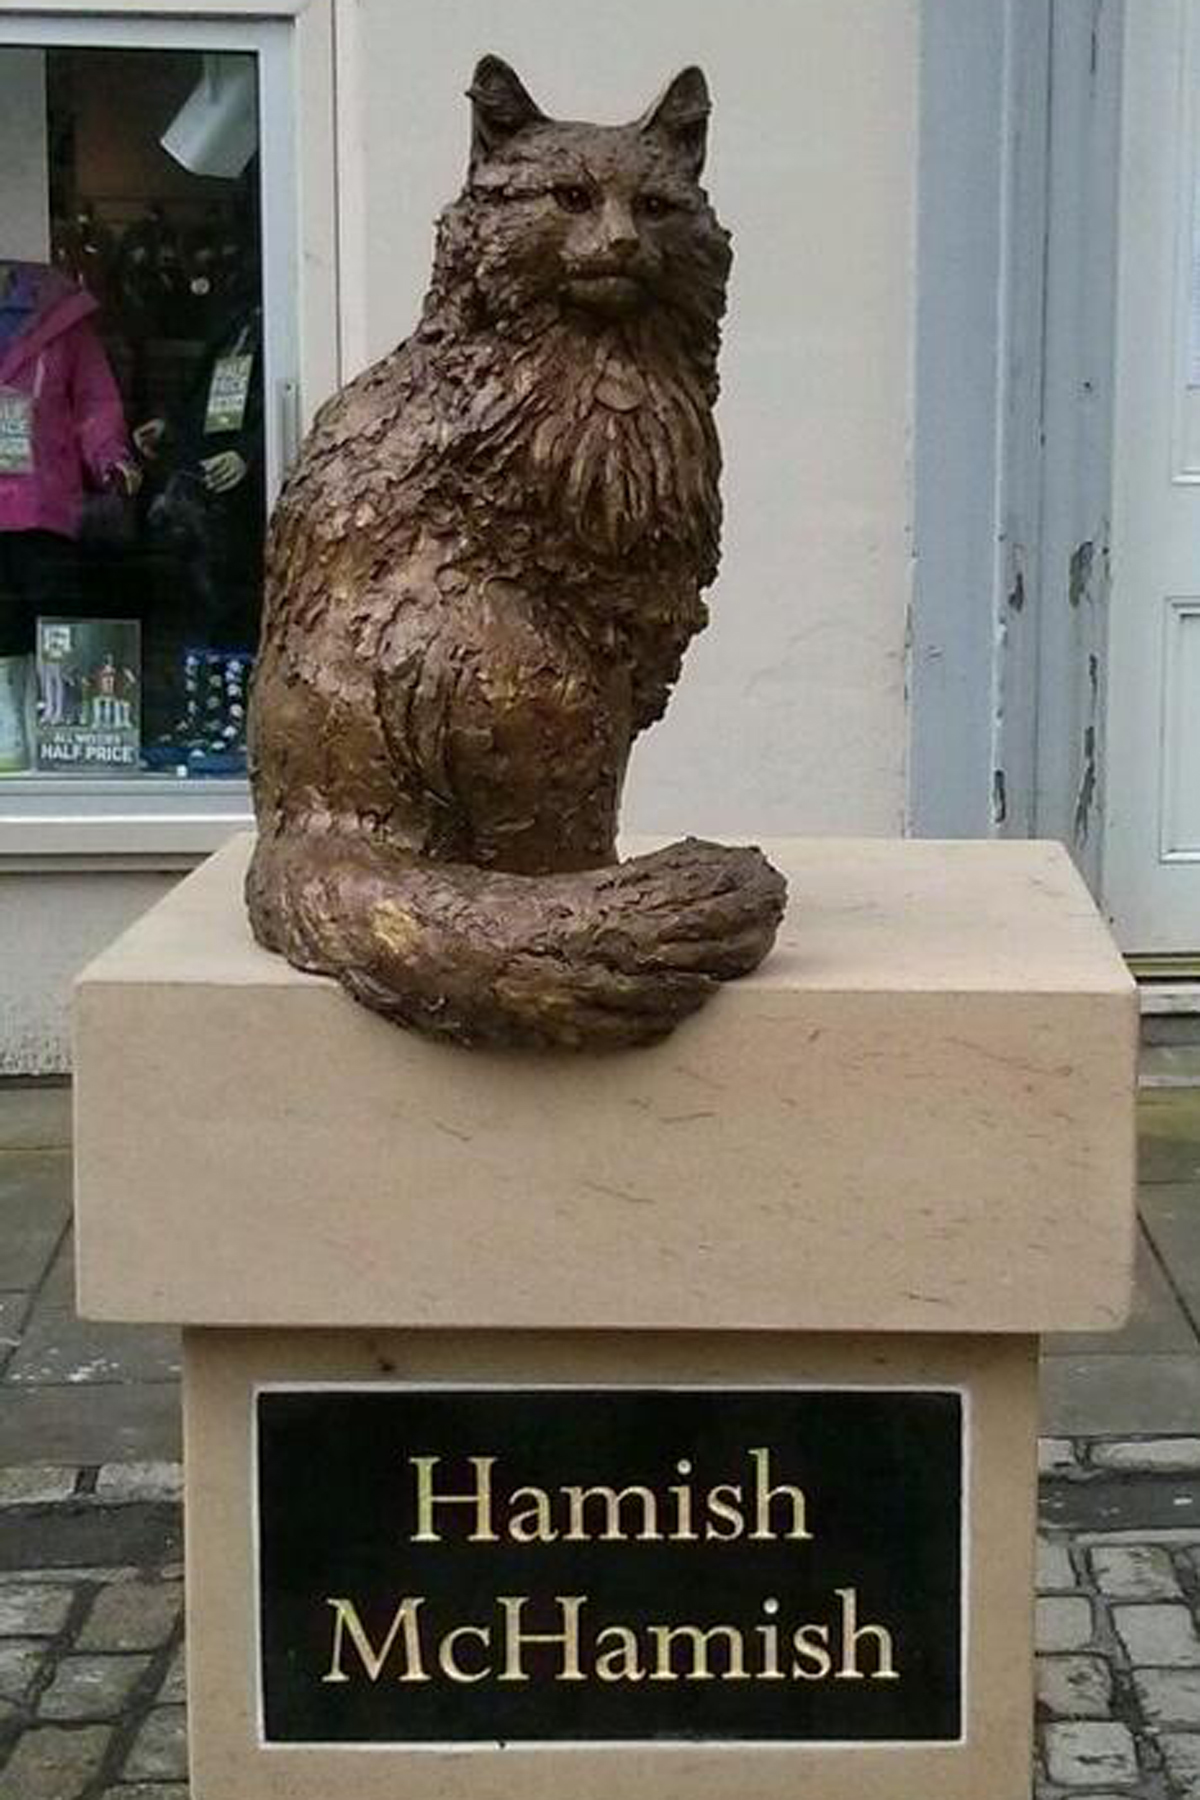 City leaders in St. Andrews, Scotland commissioned a statue of Hamish McHamish.